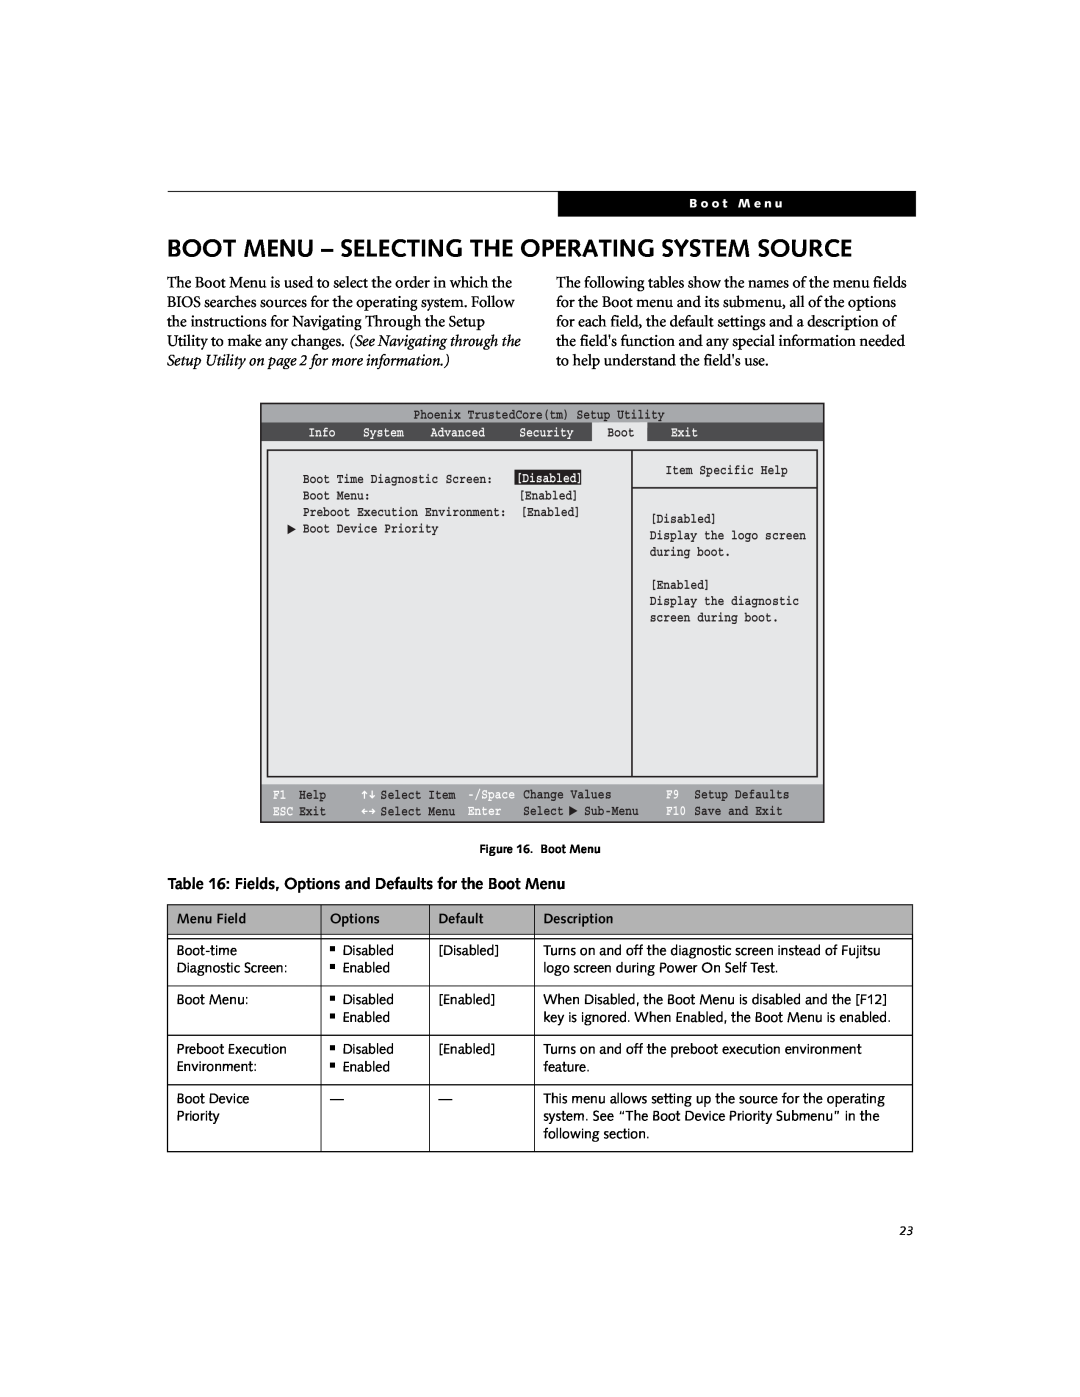 Fujitsu V700 Boot Menu - Selecting The Operating System Source, Fields, Options and Defaults for the Boot Menu, Menu Field 